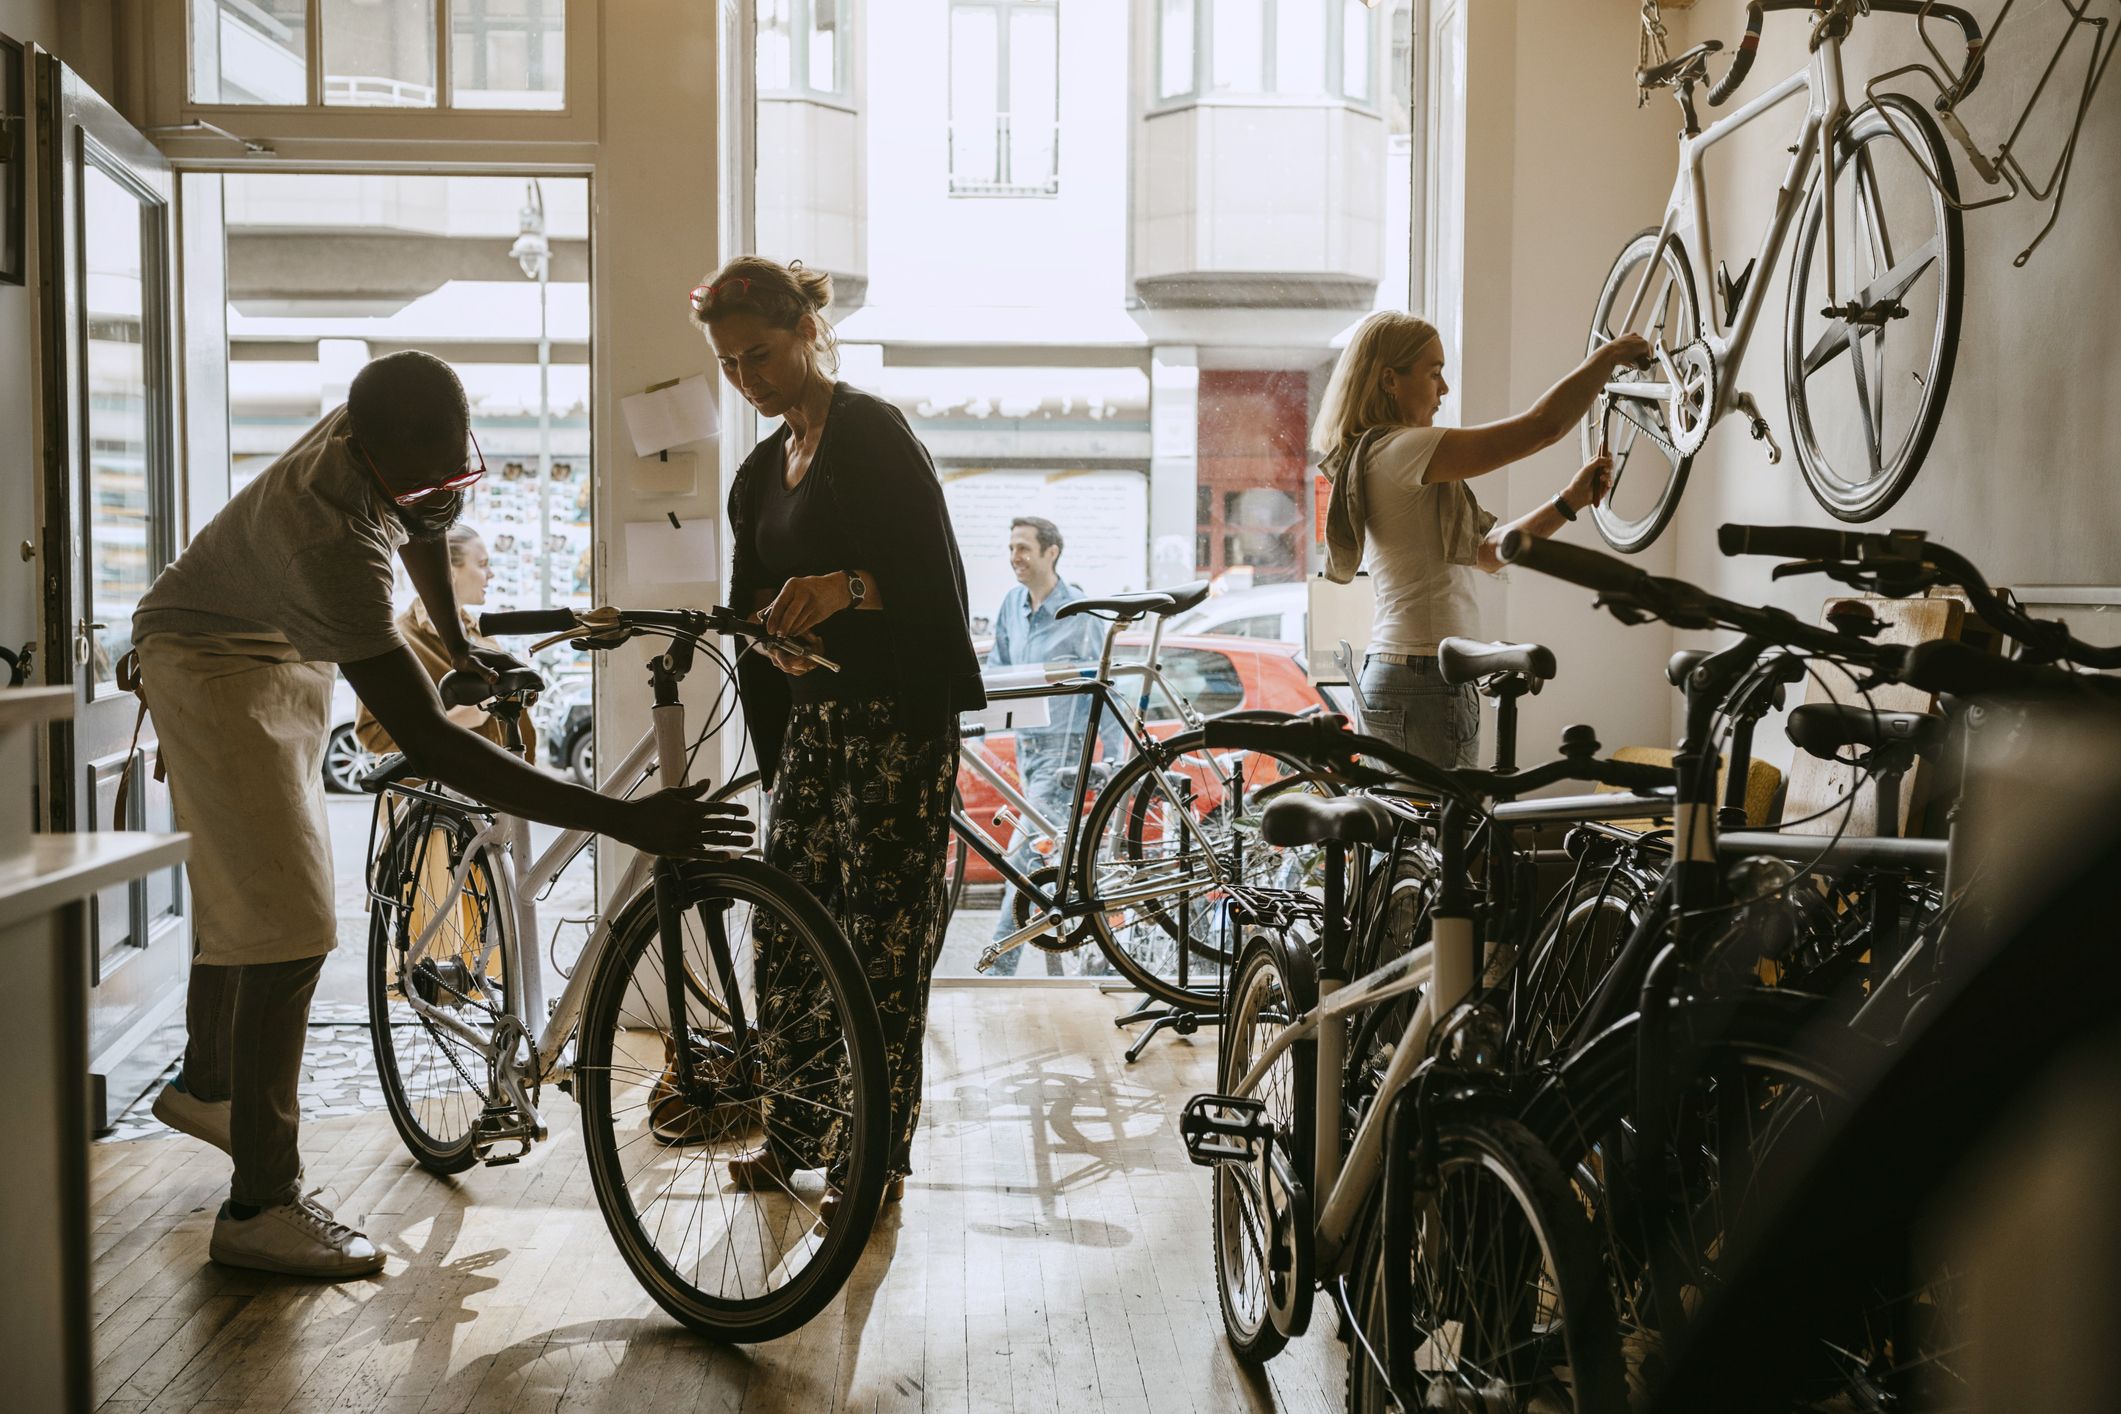 Buying a Bike: 12 Things to Know Before Buying a Bike